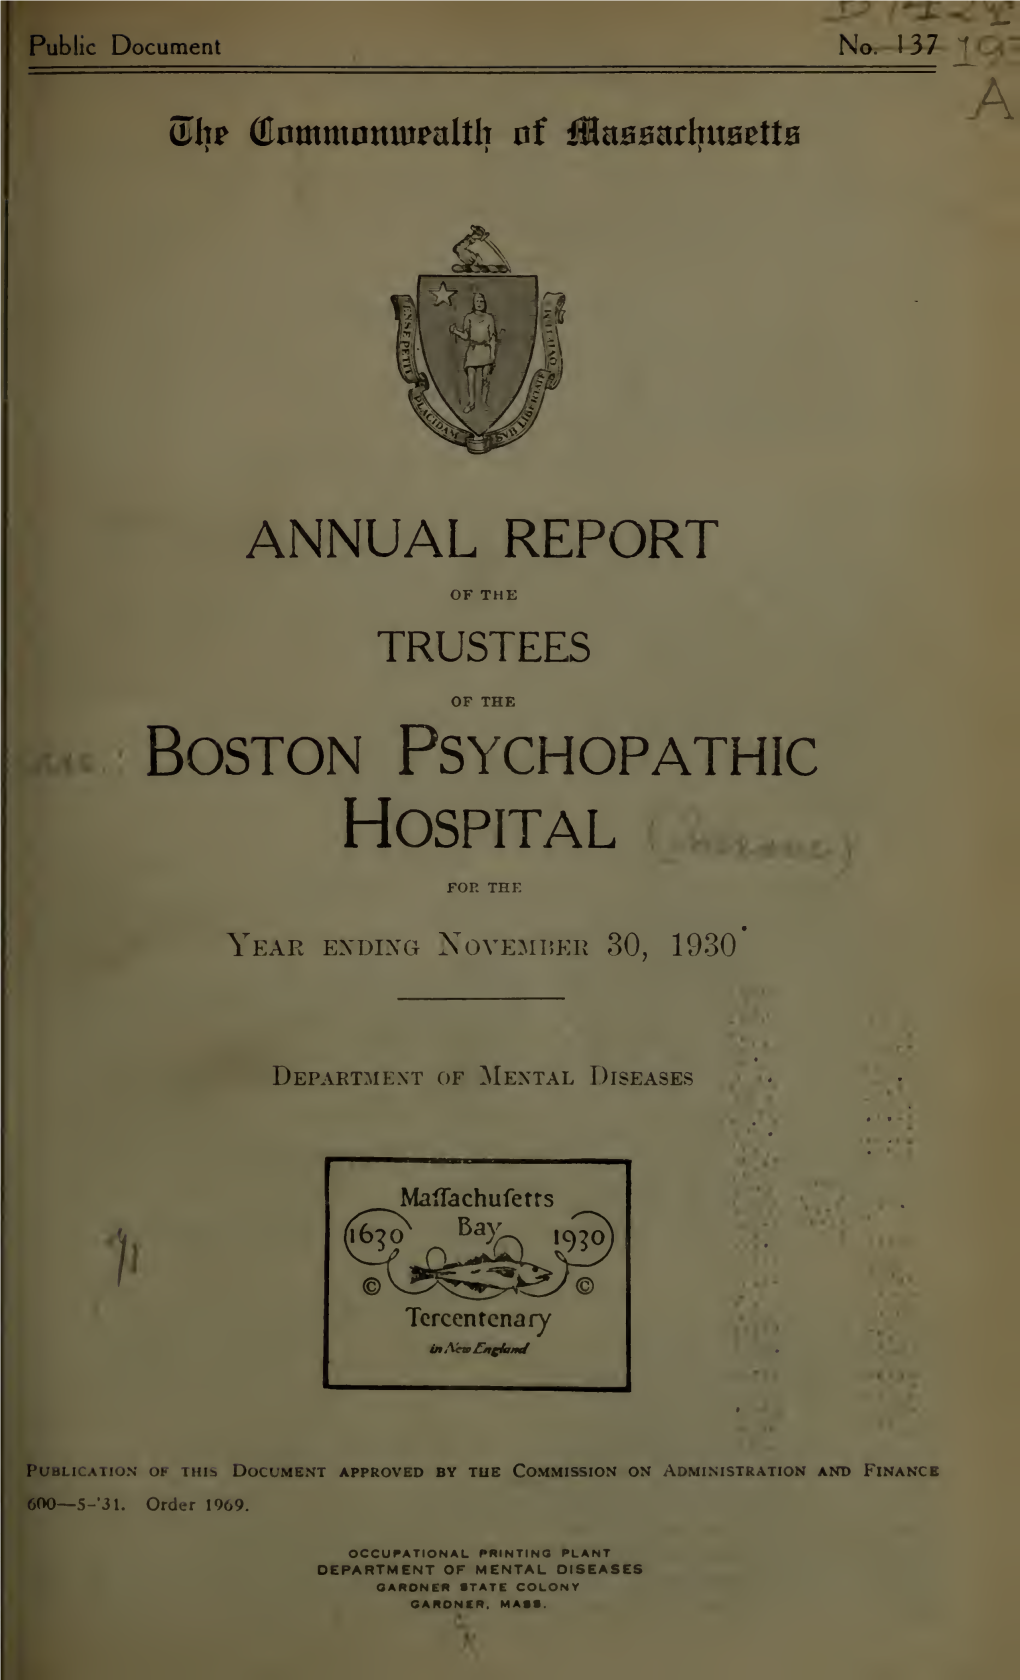 Annual Reports of the Trustees of the Boston Psychopathic Hospital